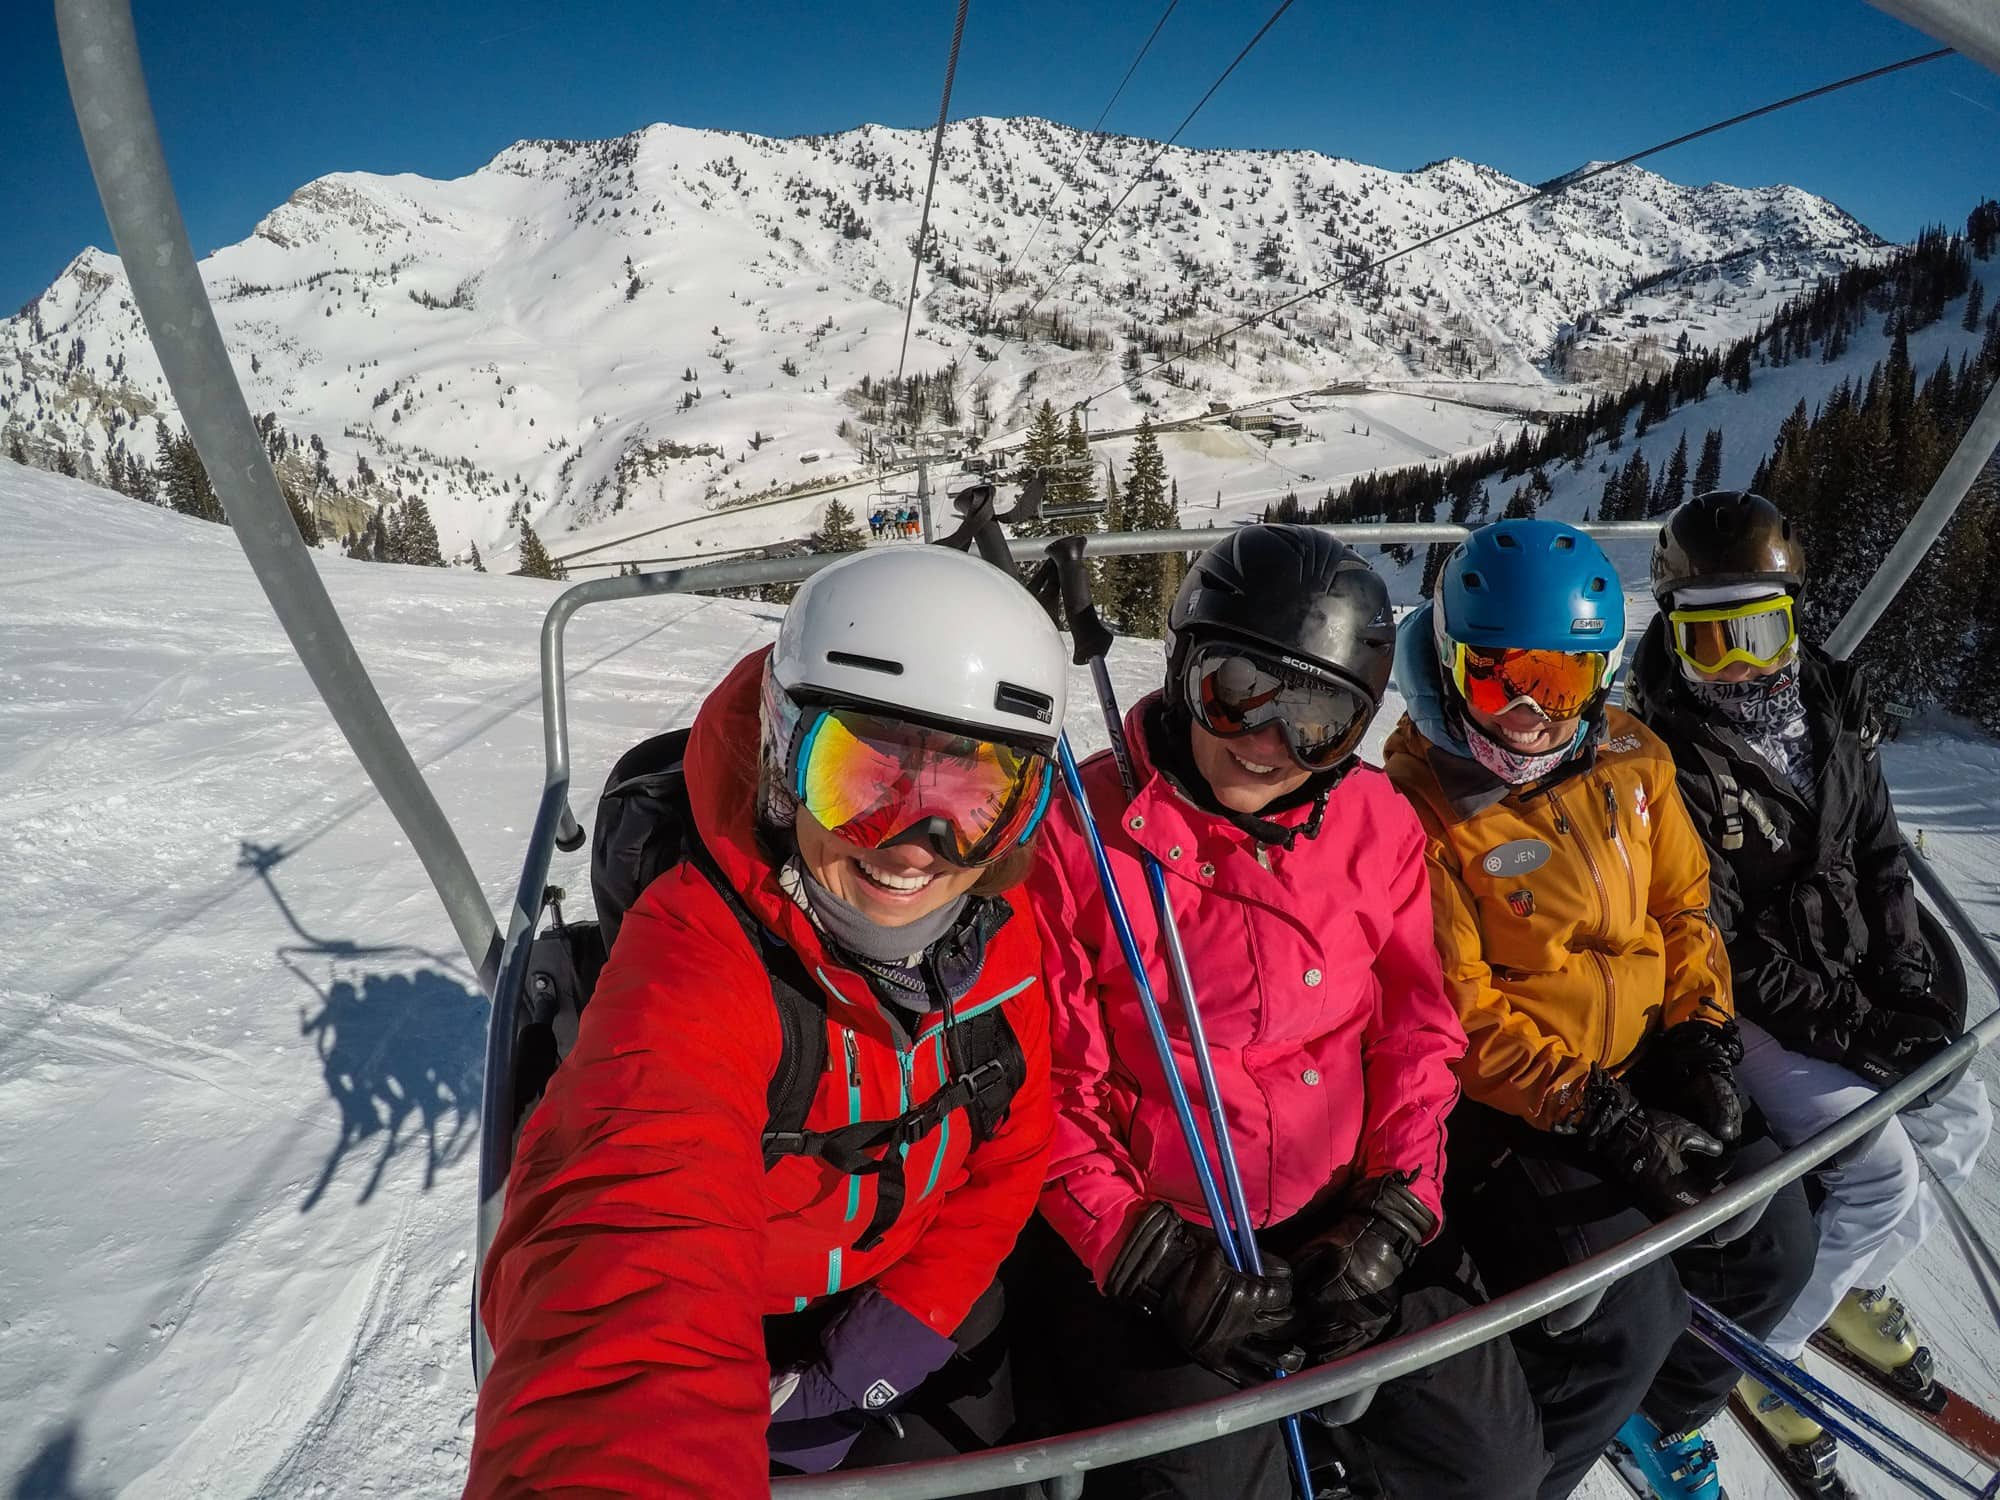 Four female skiers sit on a chair lift at Alta in Salt Lake City Utah